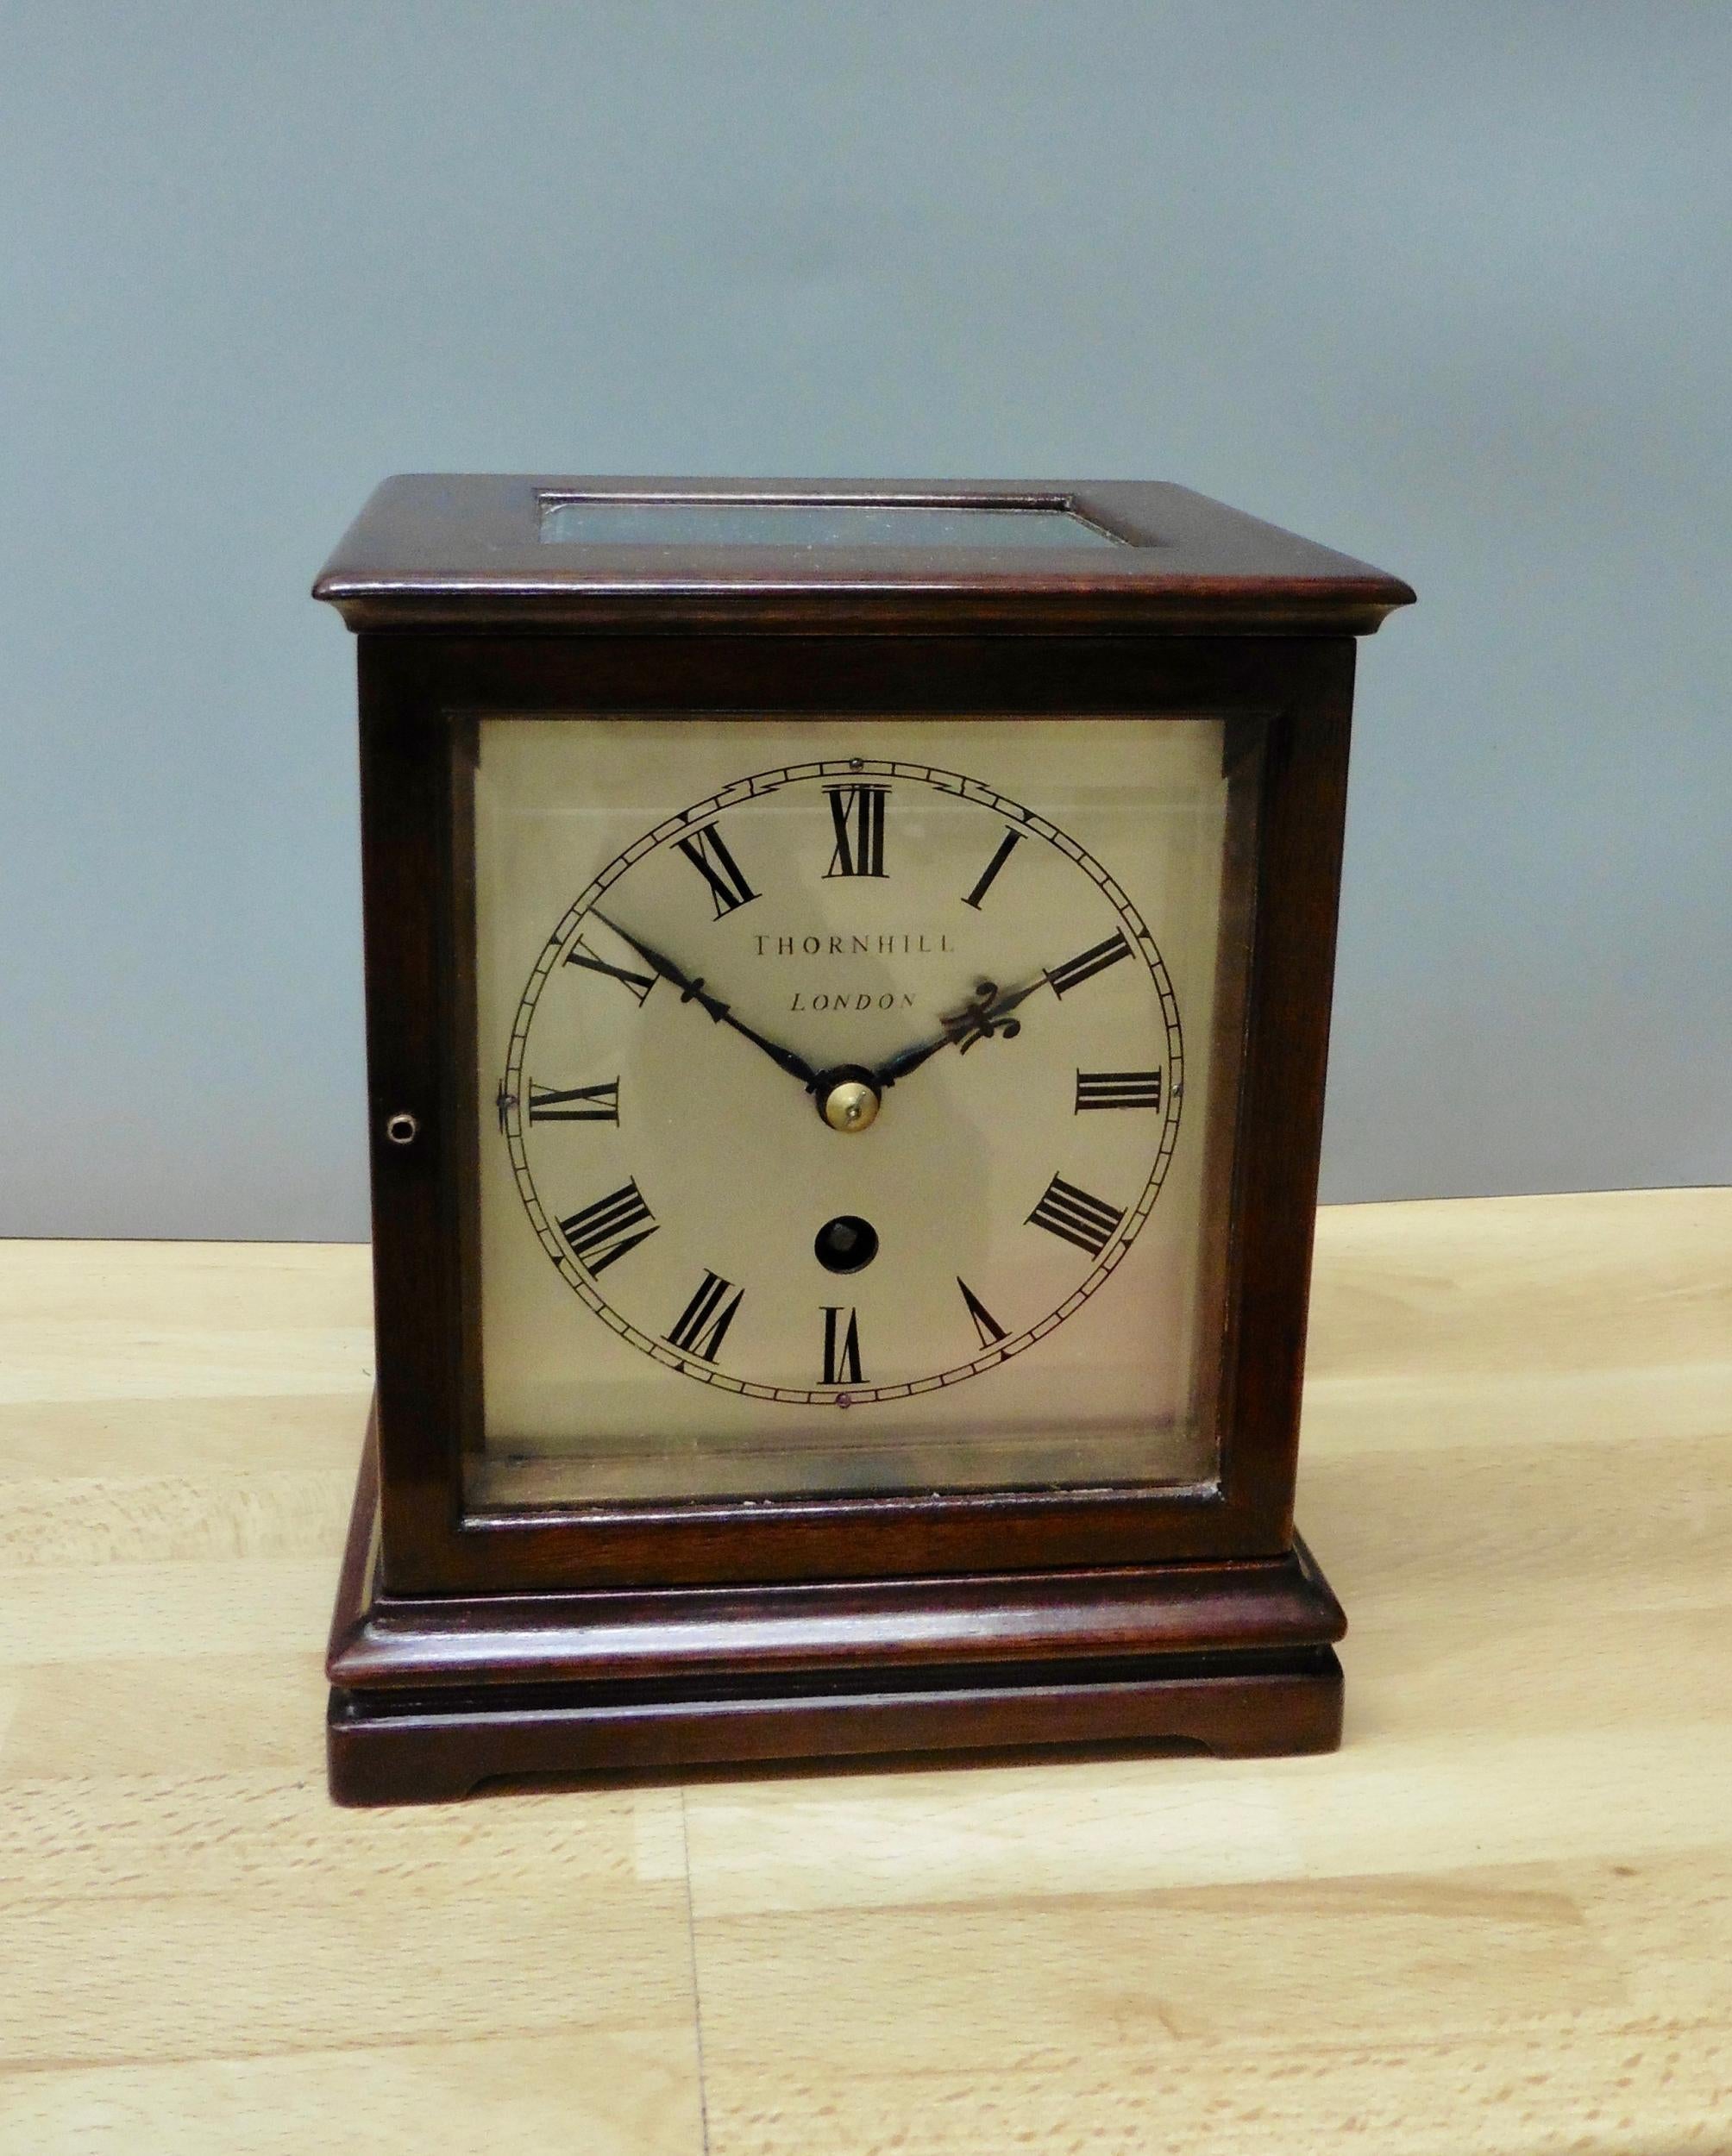 Miniature mahogany library clock, Thornhill, London

Miniature mahogany library clock standing on a stepped plinth with pad feet. Four glass panels with beveled glass and glass panel to the top to view the movement.

Silvered dial with Roman